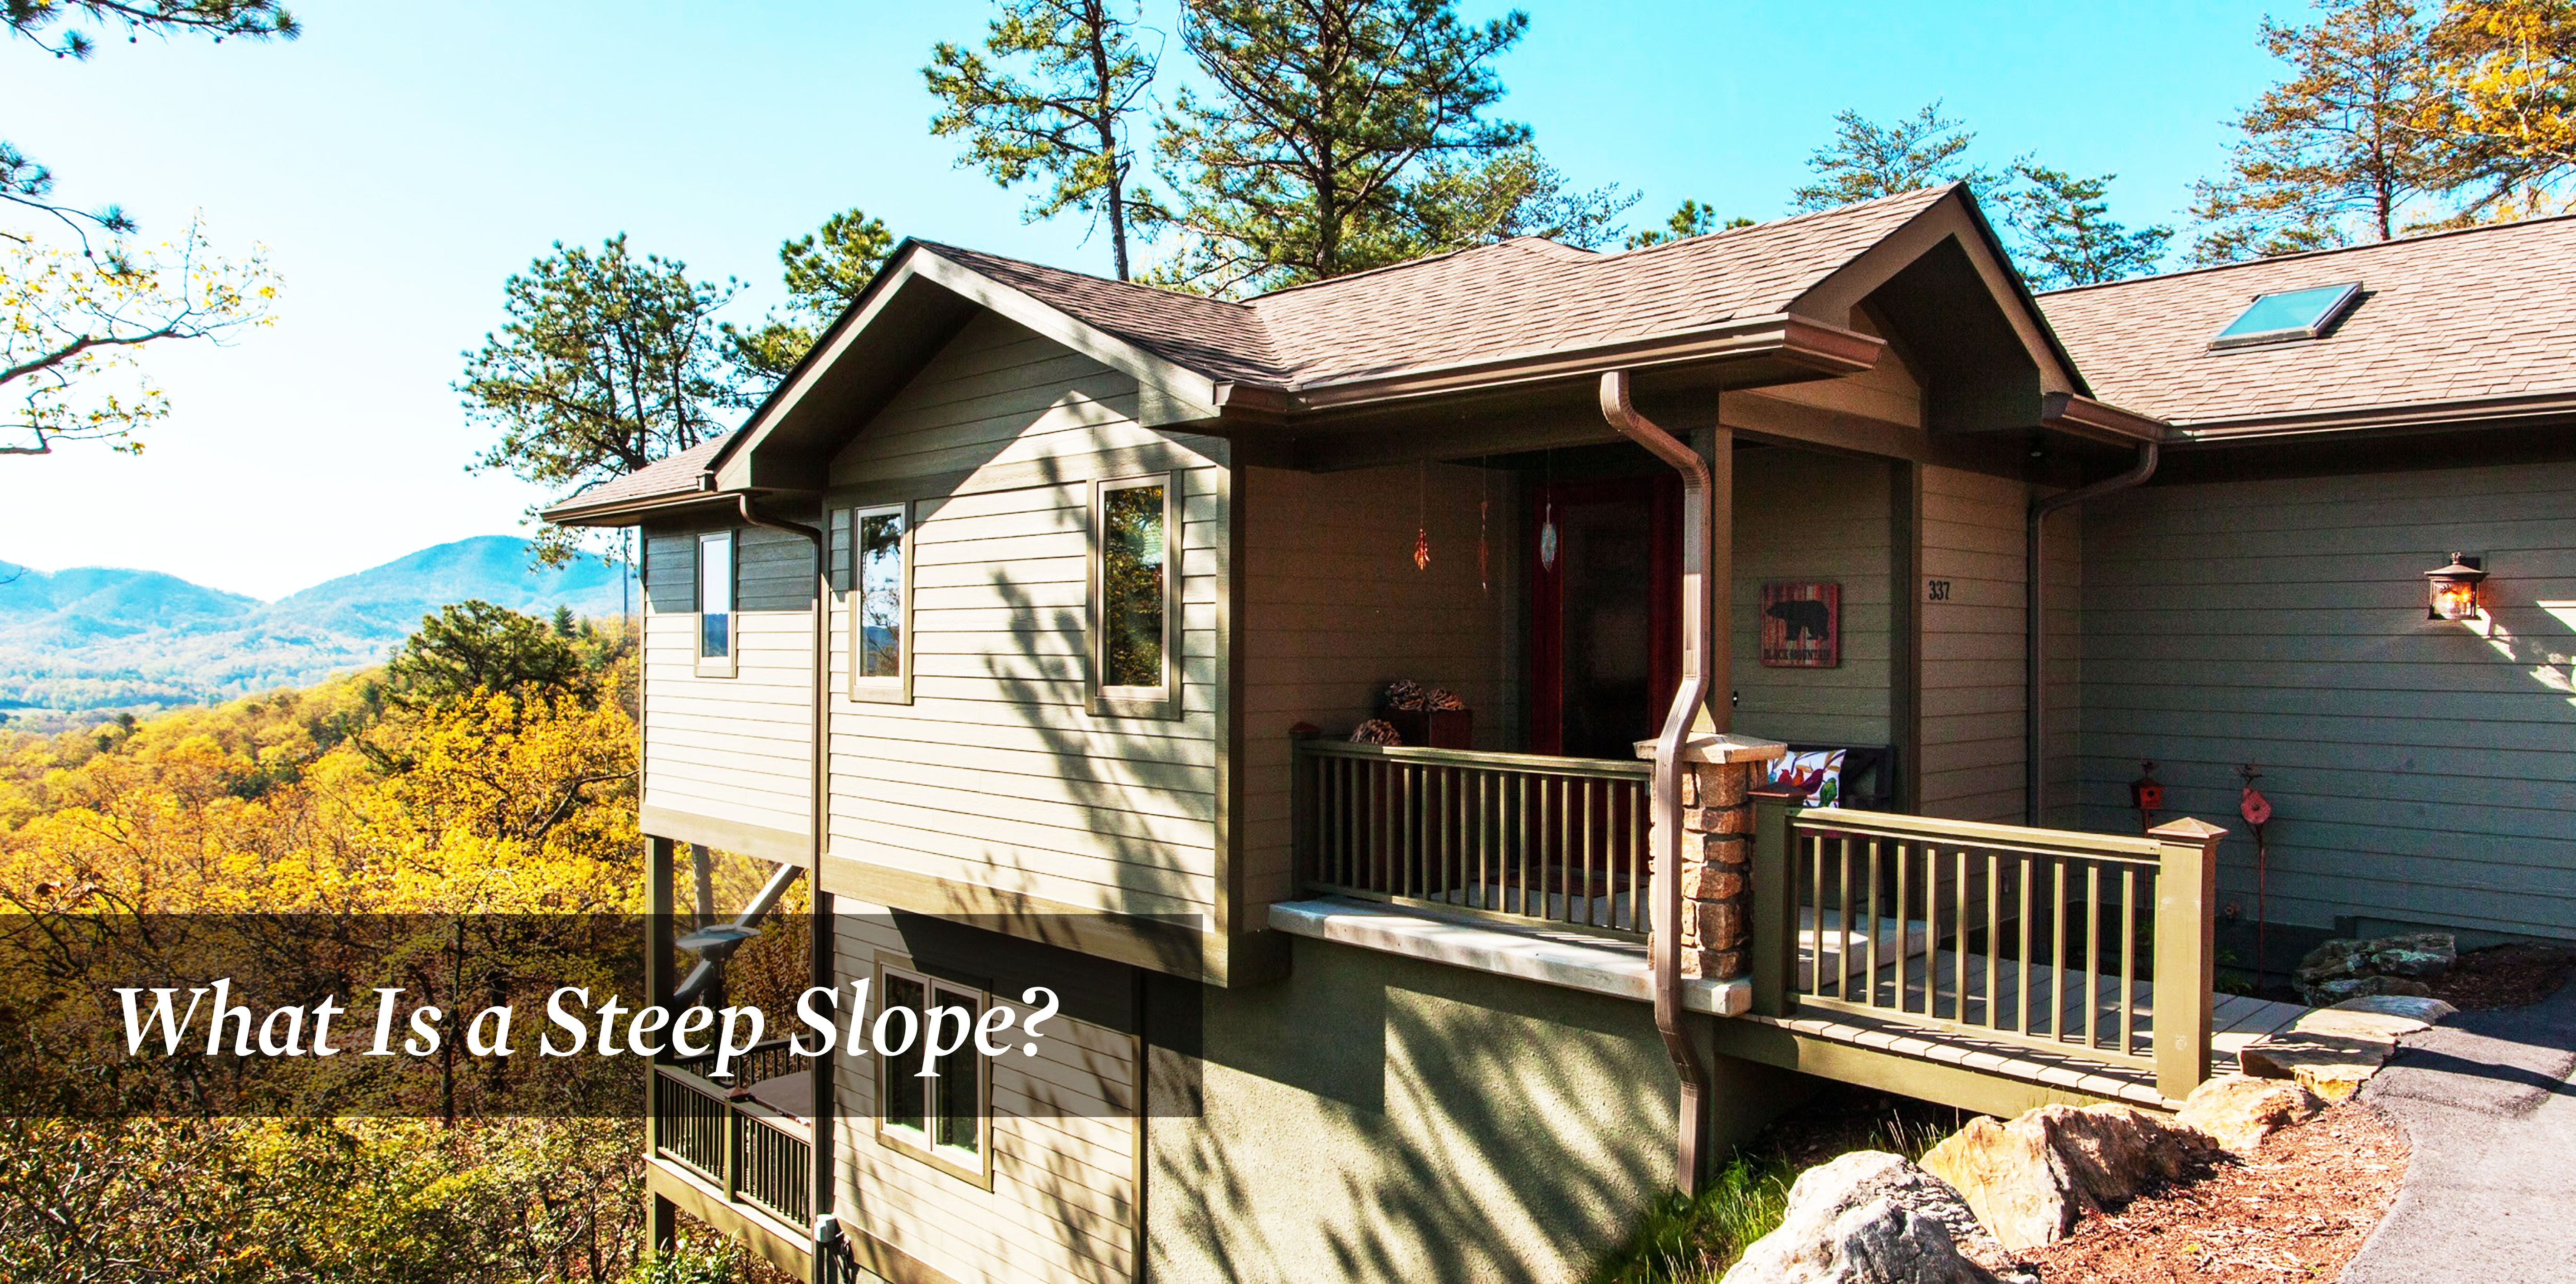 Building on a Steep Slope or Lot: Costs & Considerations